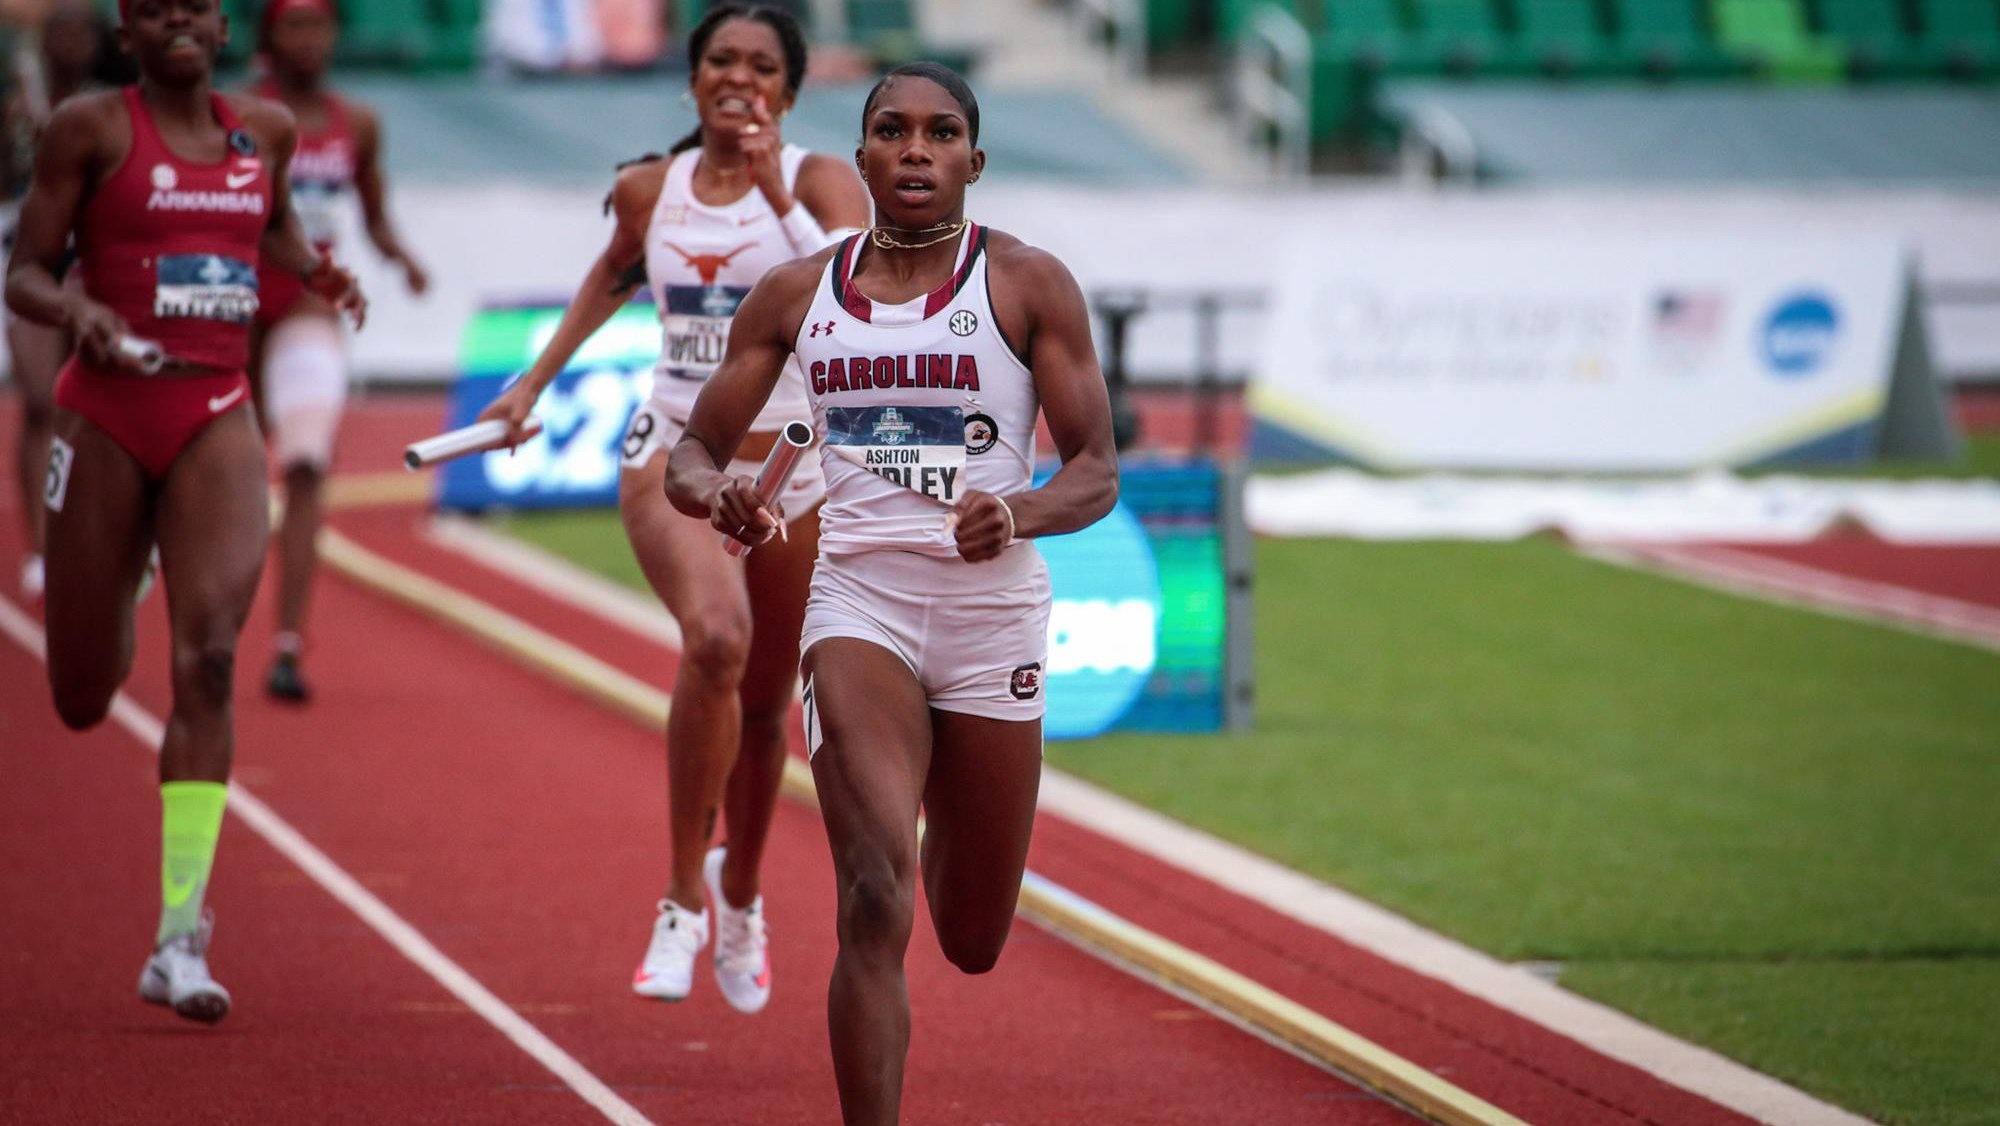 Lindley, 4x4 Make Finals for Gamecock Women at NCAAs